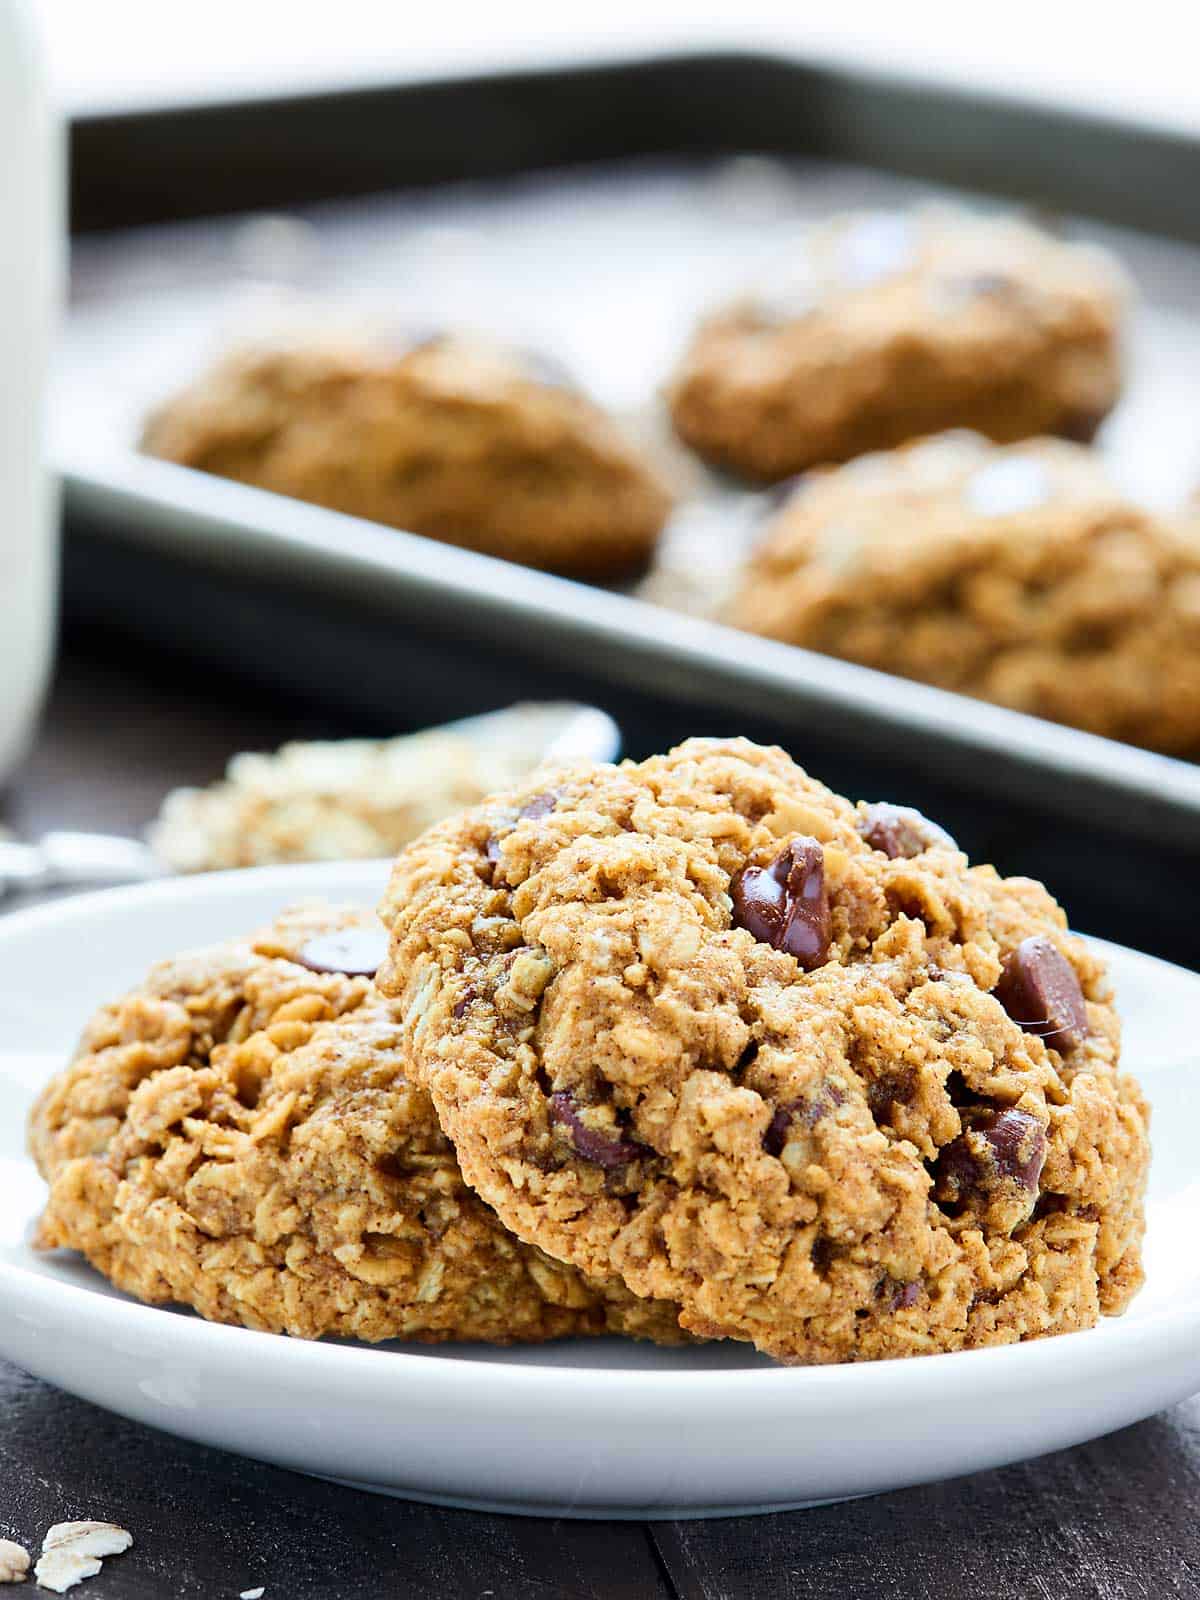 Oatmeal Chocolate Chip Cookies Recipe - Chewy &amp; Easy!